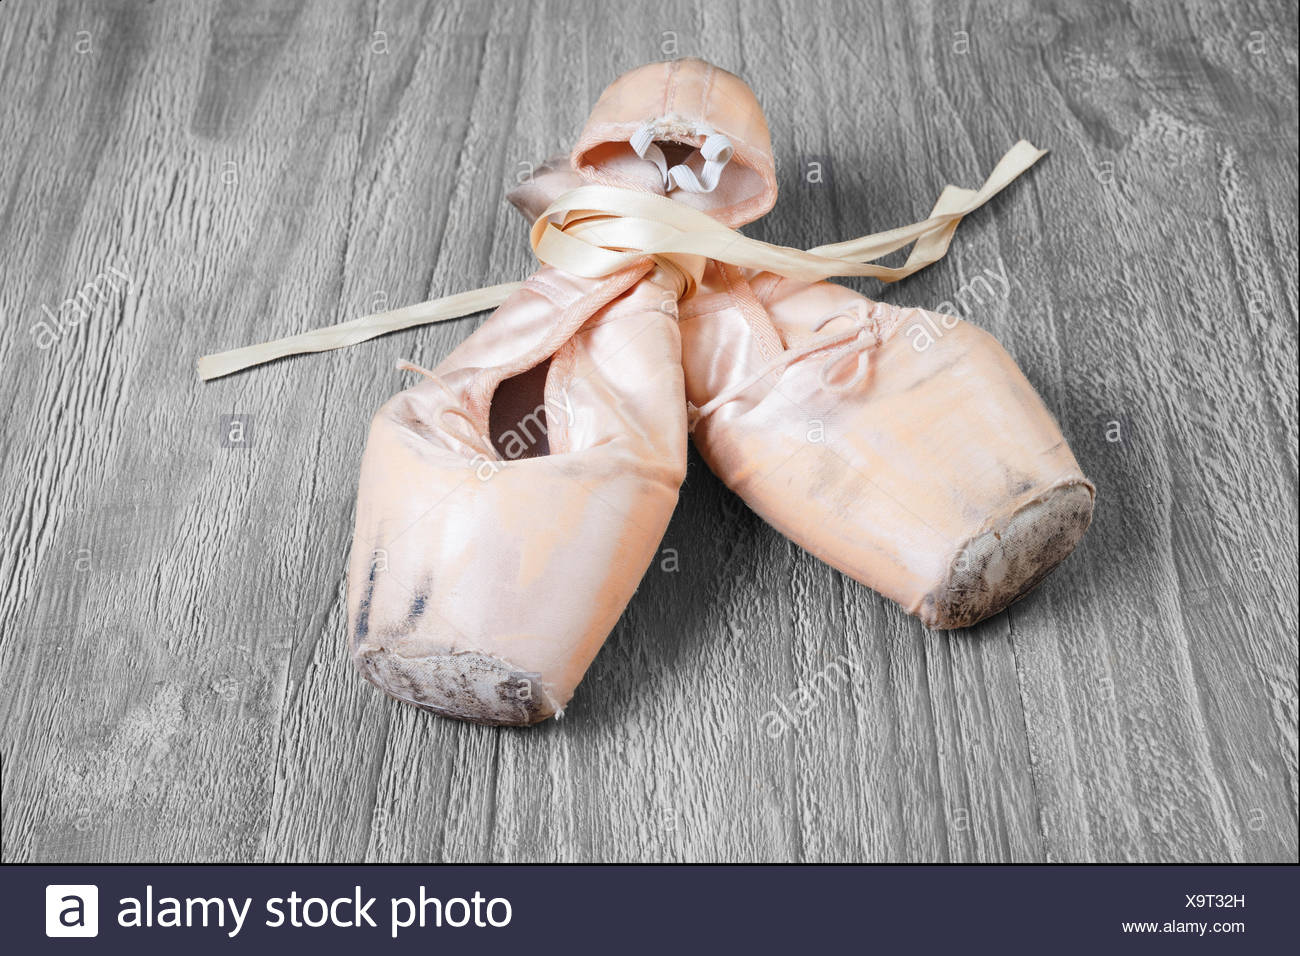 used ballet pointe shoes Stock Photo 